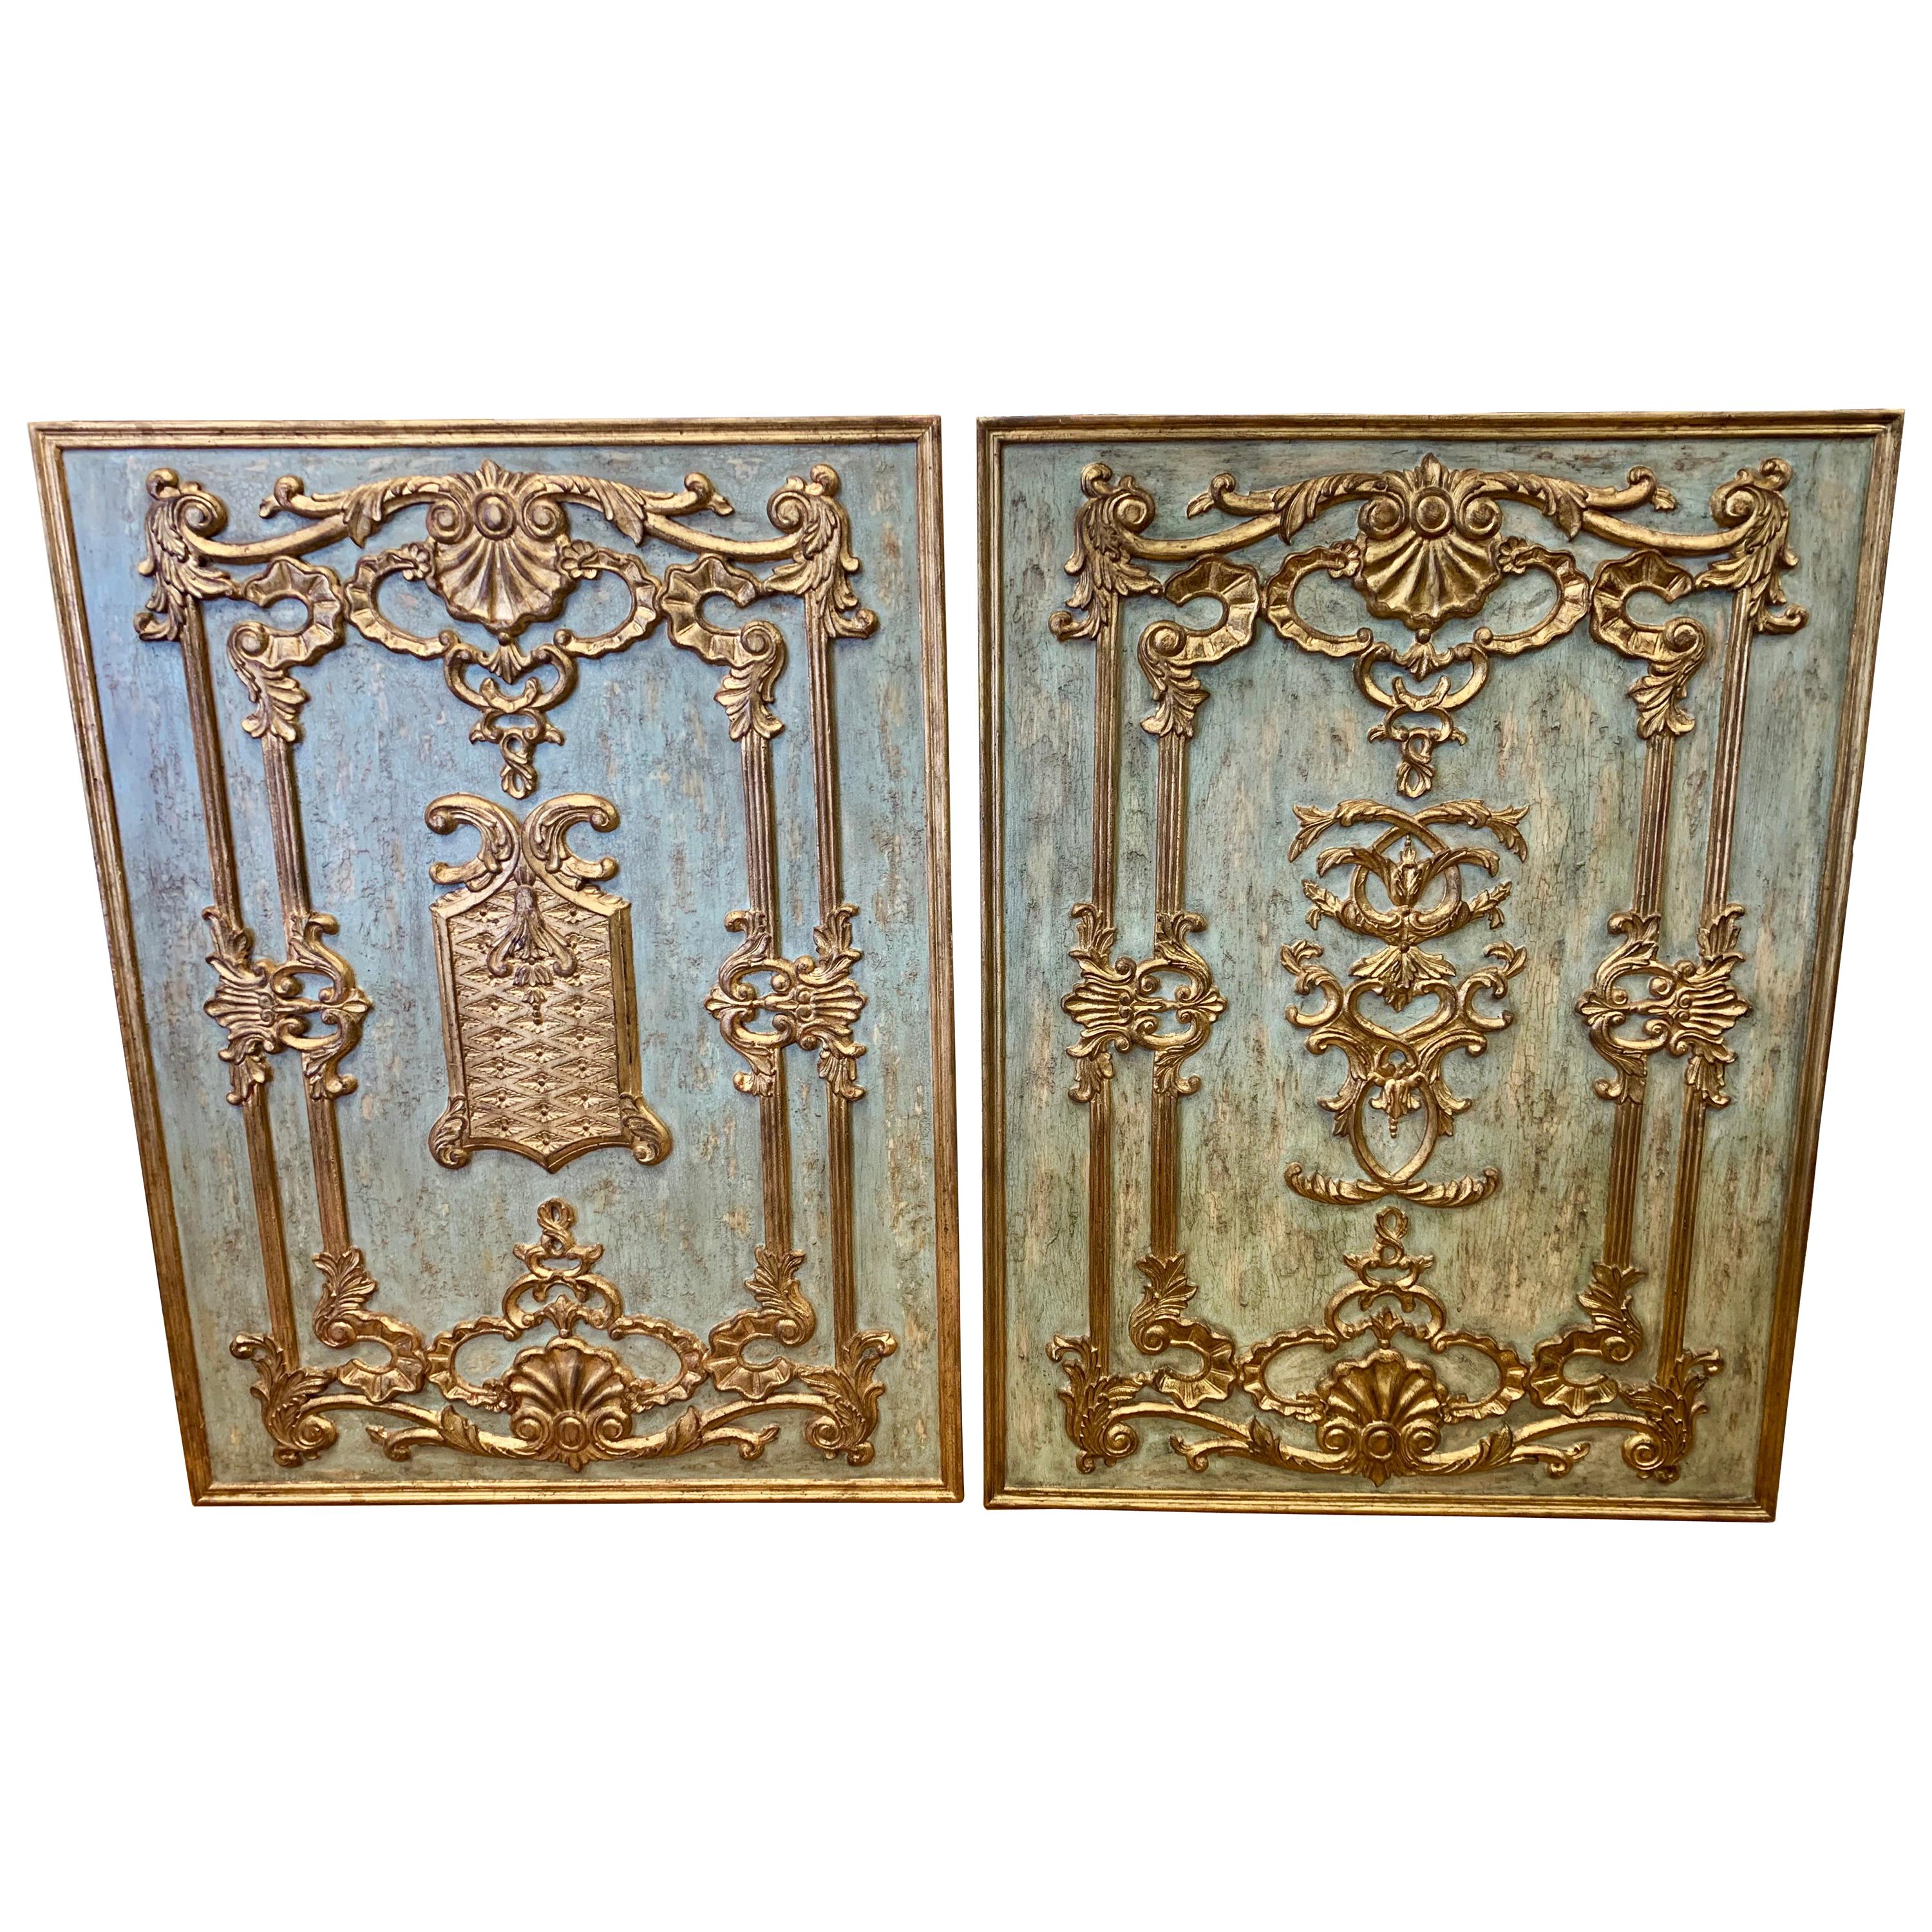 Pair of Large Italian Carved Giltwood Boiserie Architectural Panels